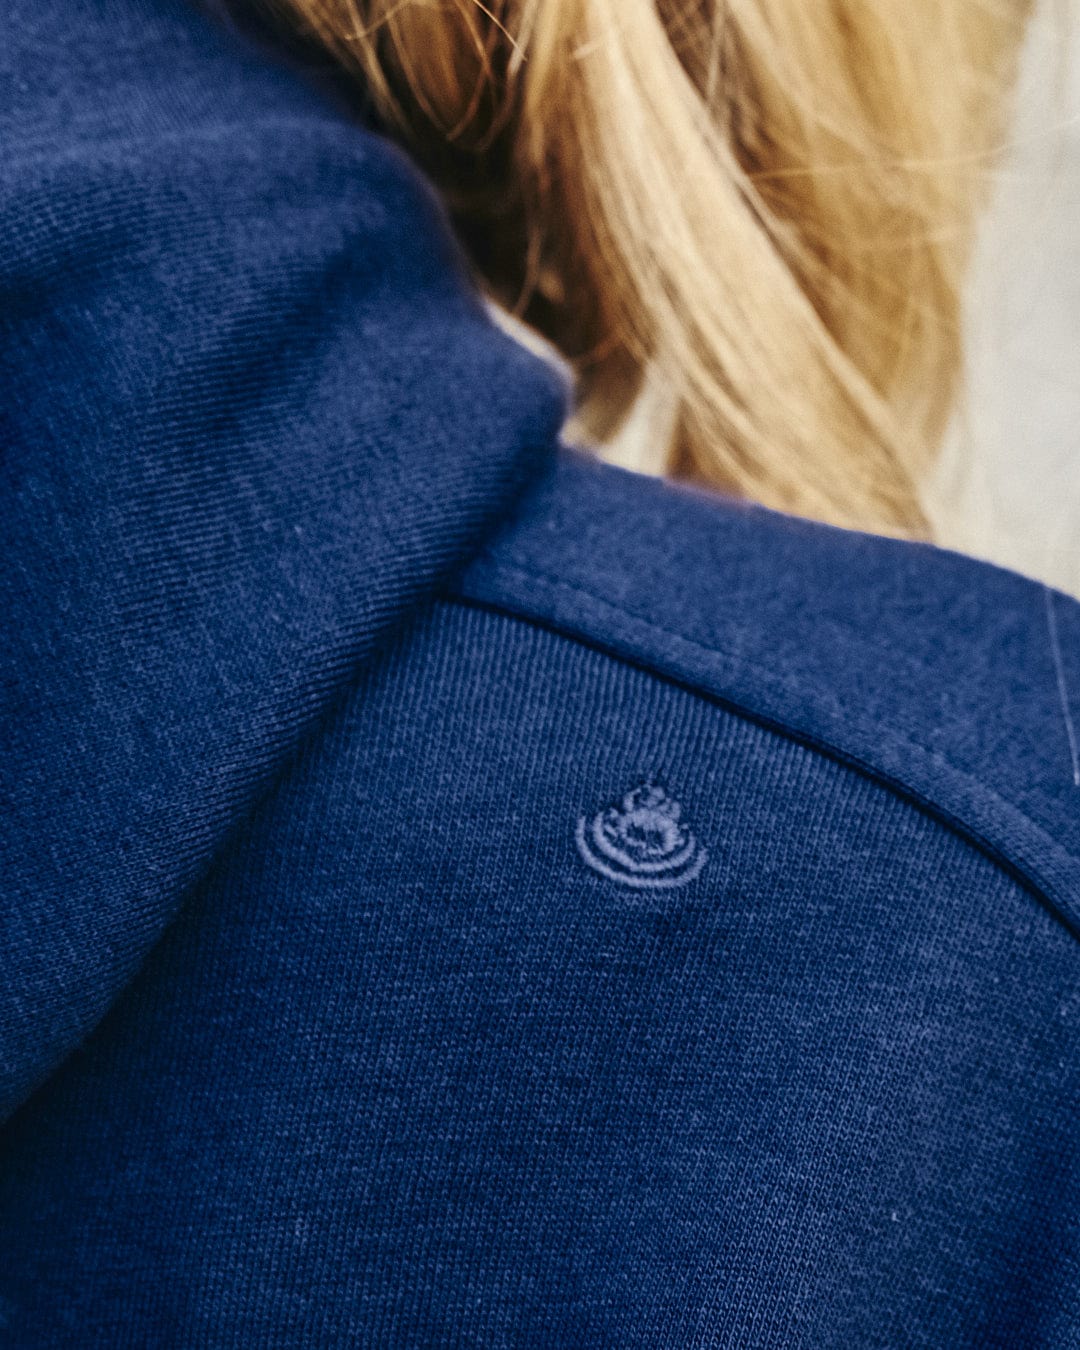 A stylish Saltrock woman's Elsa - Womens Hooded Sweat Dress - Dark Blue, combining both comfort and a logo design on the back.